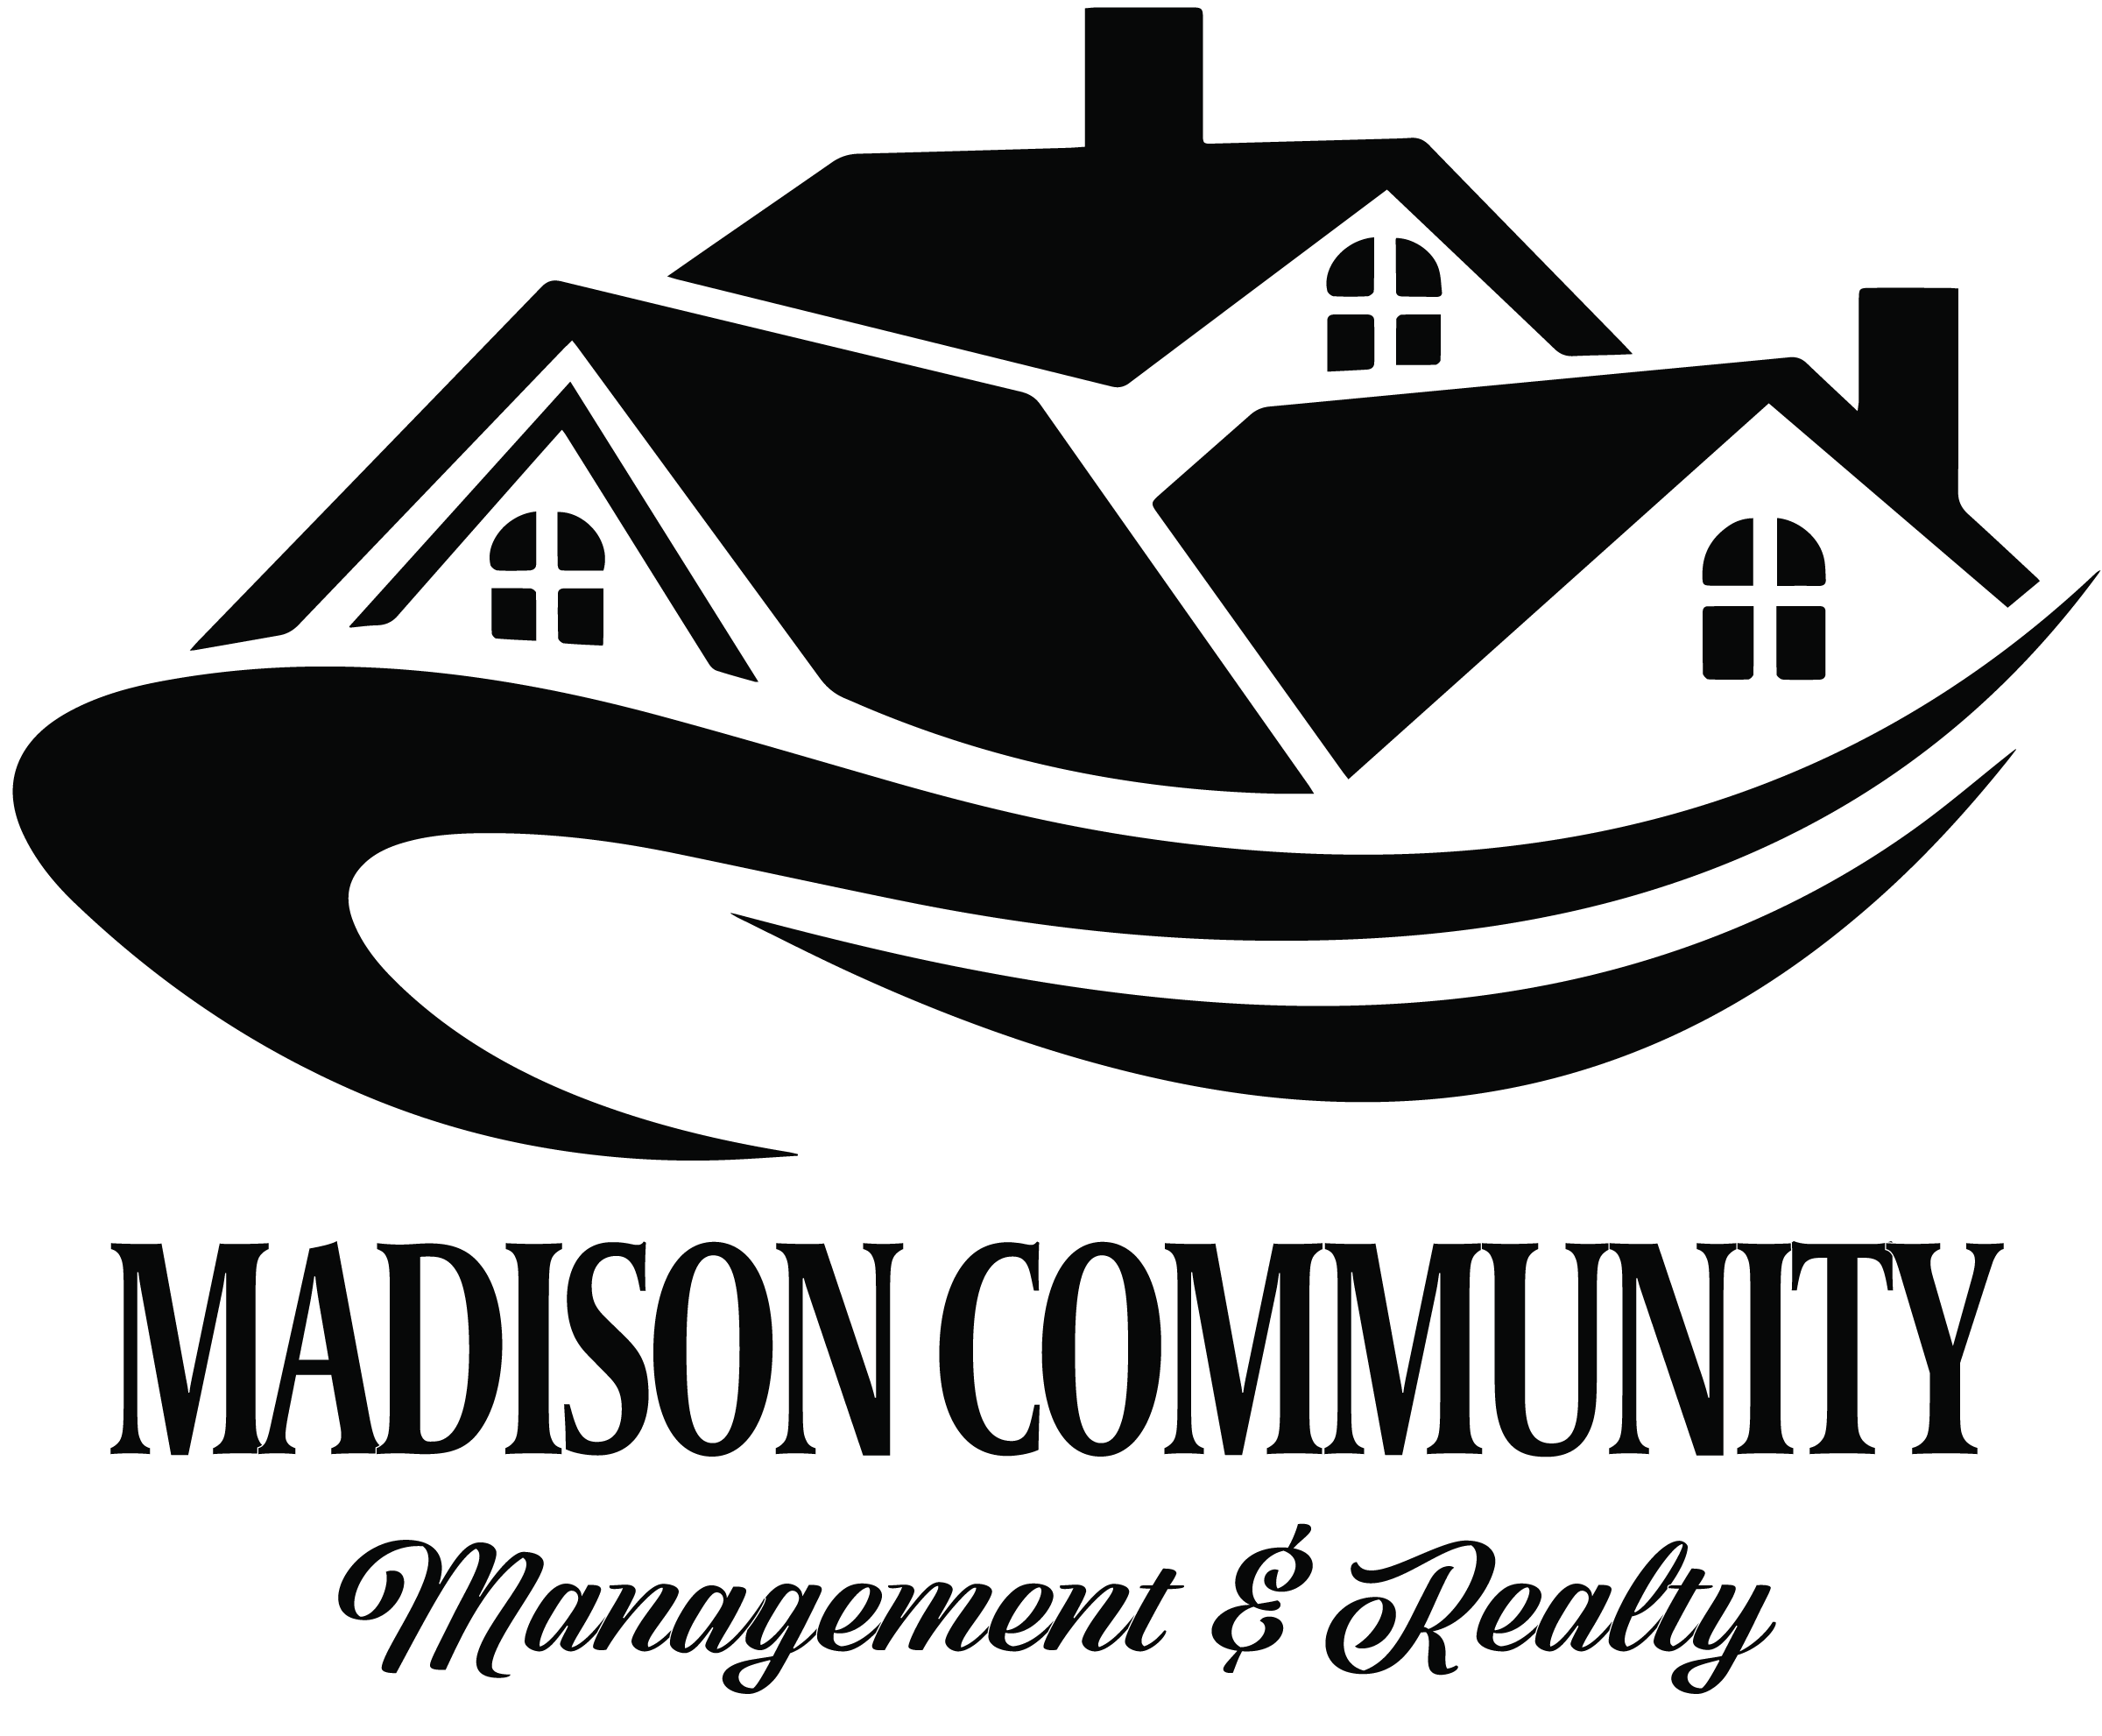 Madison Community Management...Make your next move with us!